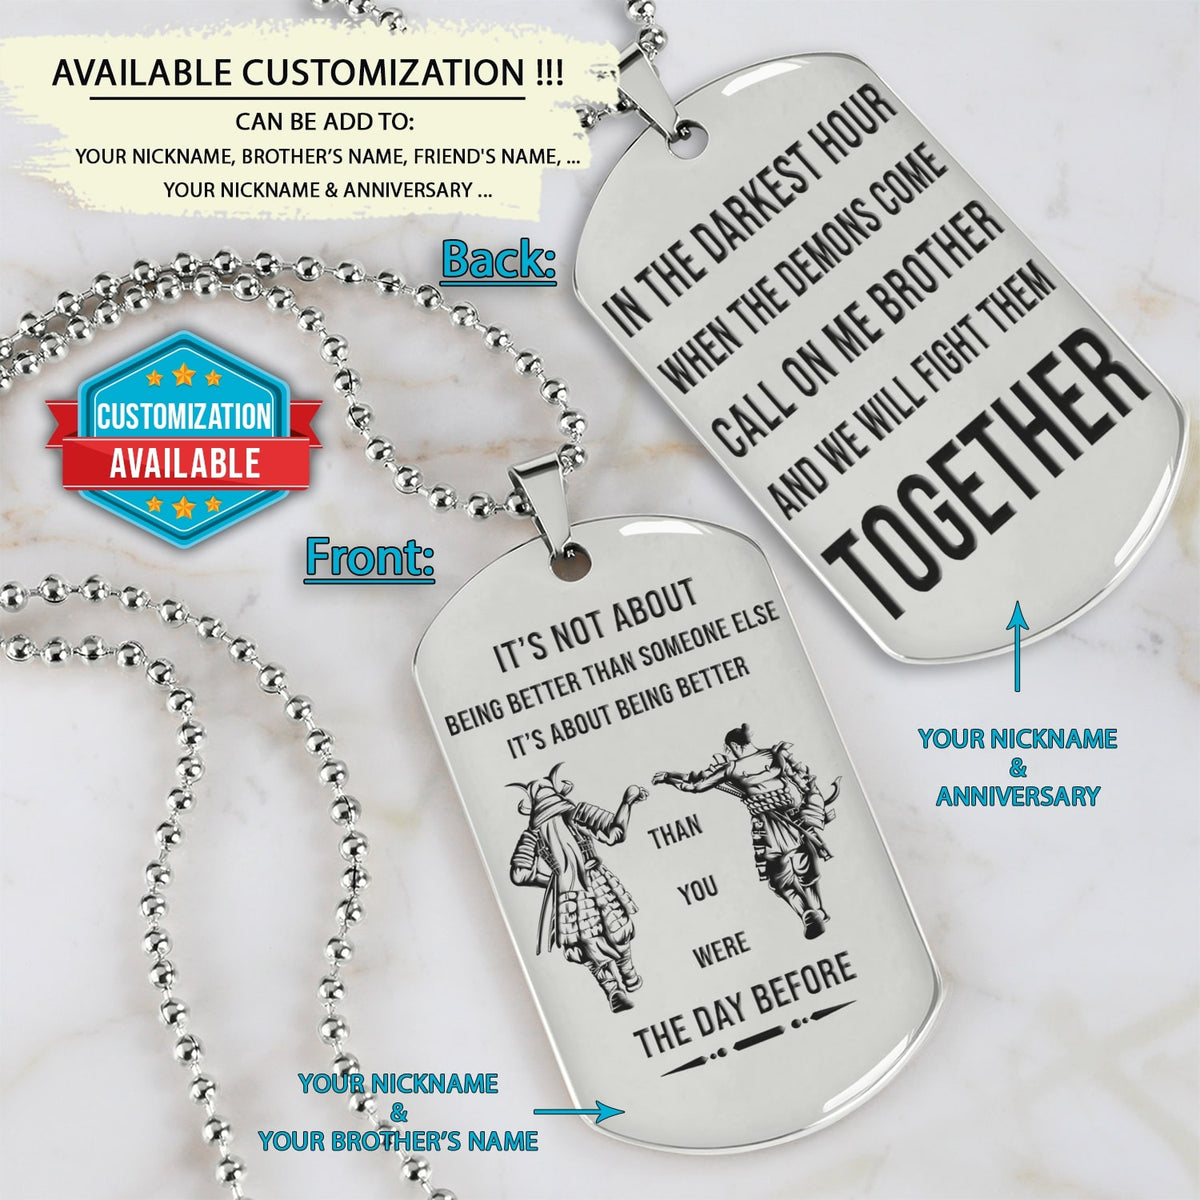 SAD060 - Call On Me Brother - It's About Being Better Than You Were The Day Before - Samurai - Bushido - Katana - Ronin - Miyamoto Musashi - Silver Double-Sided Dog Tag